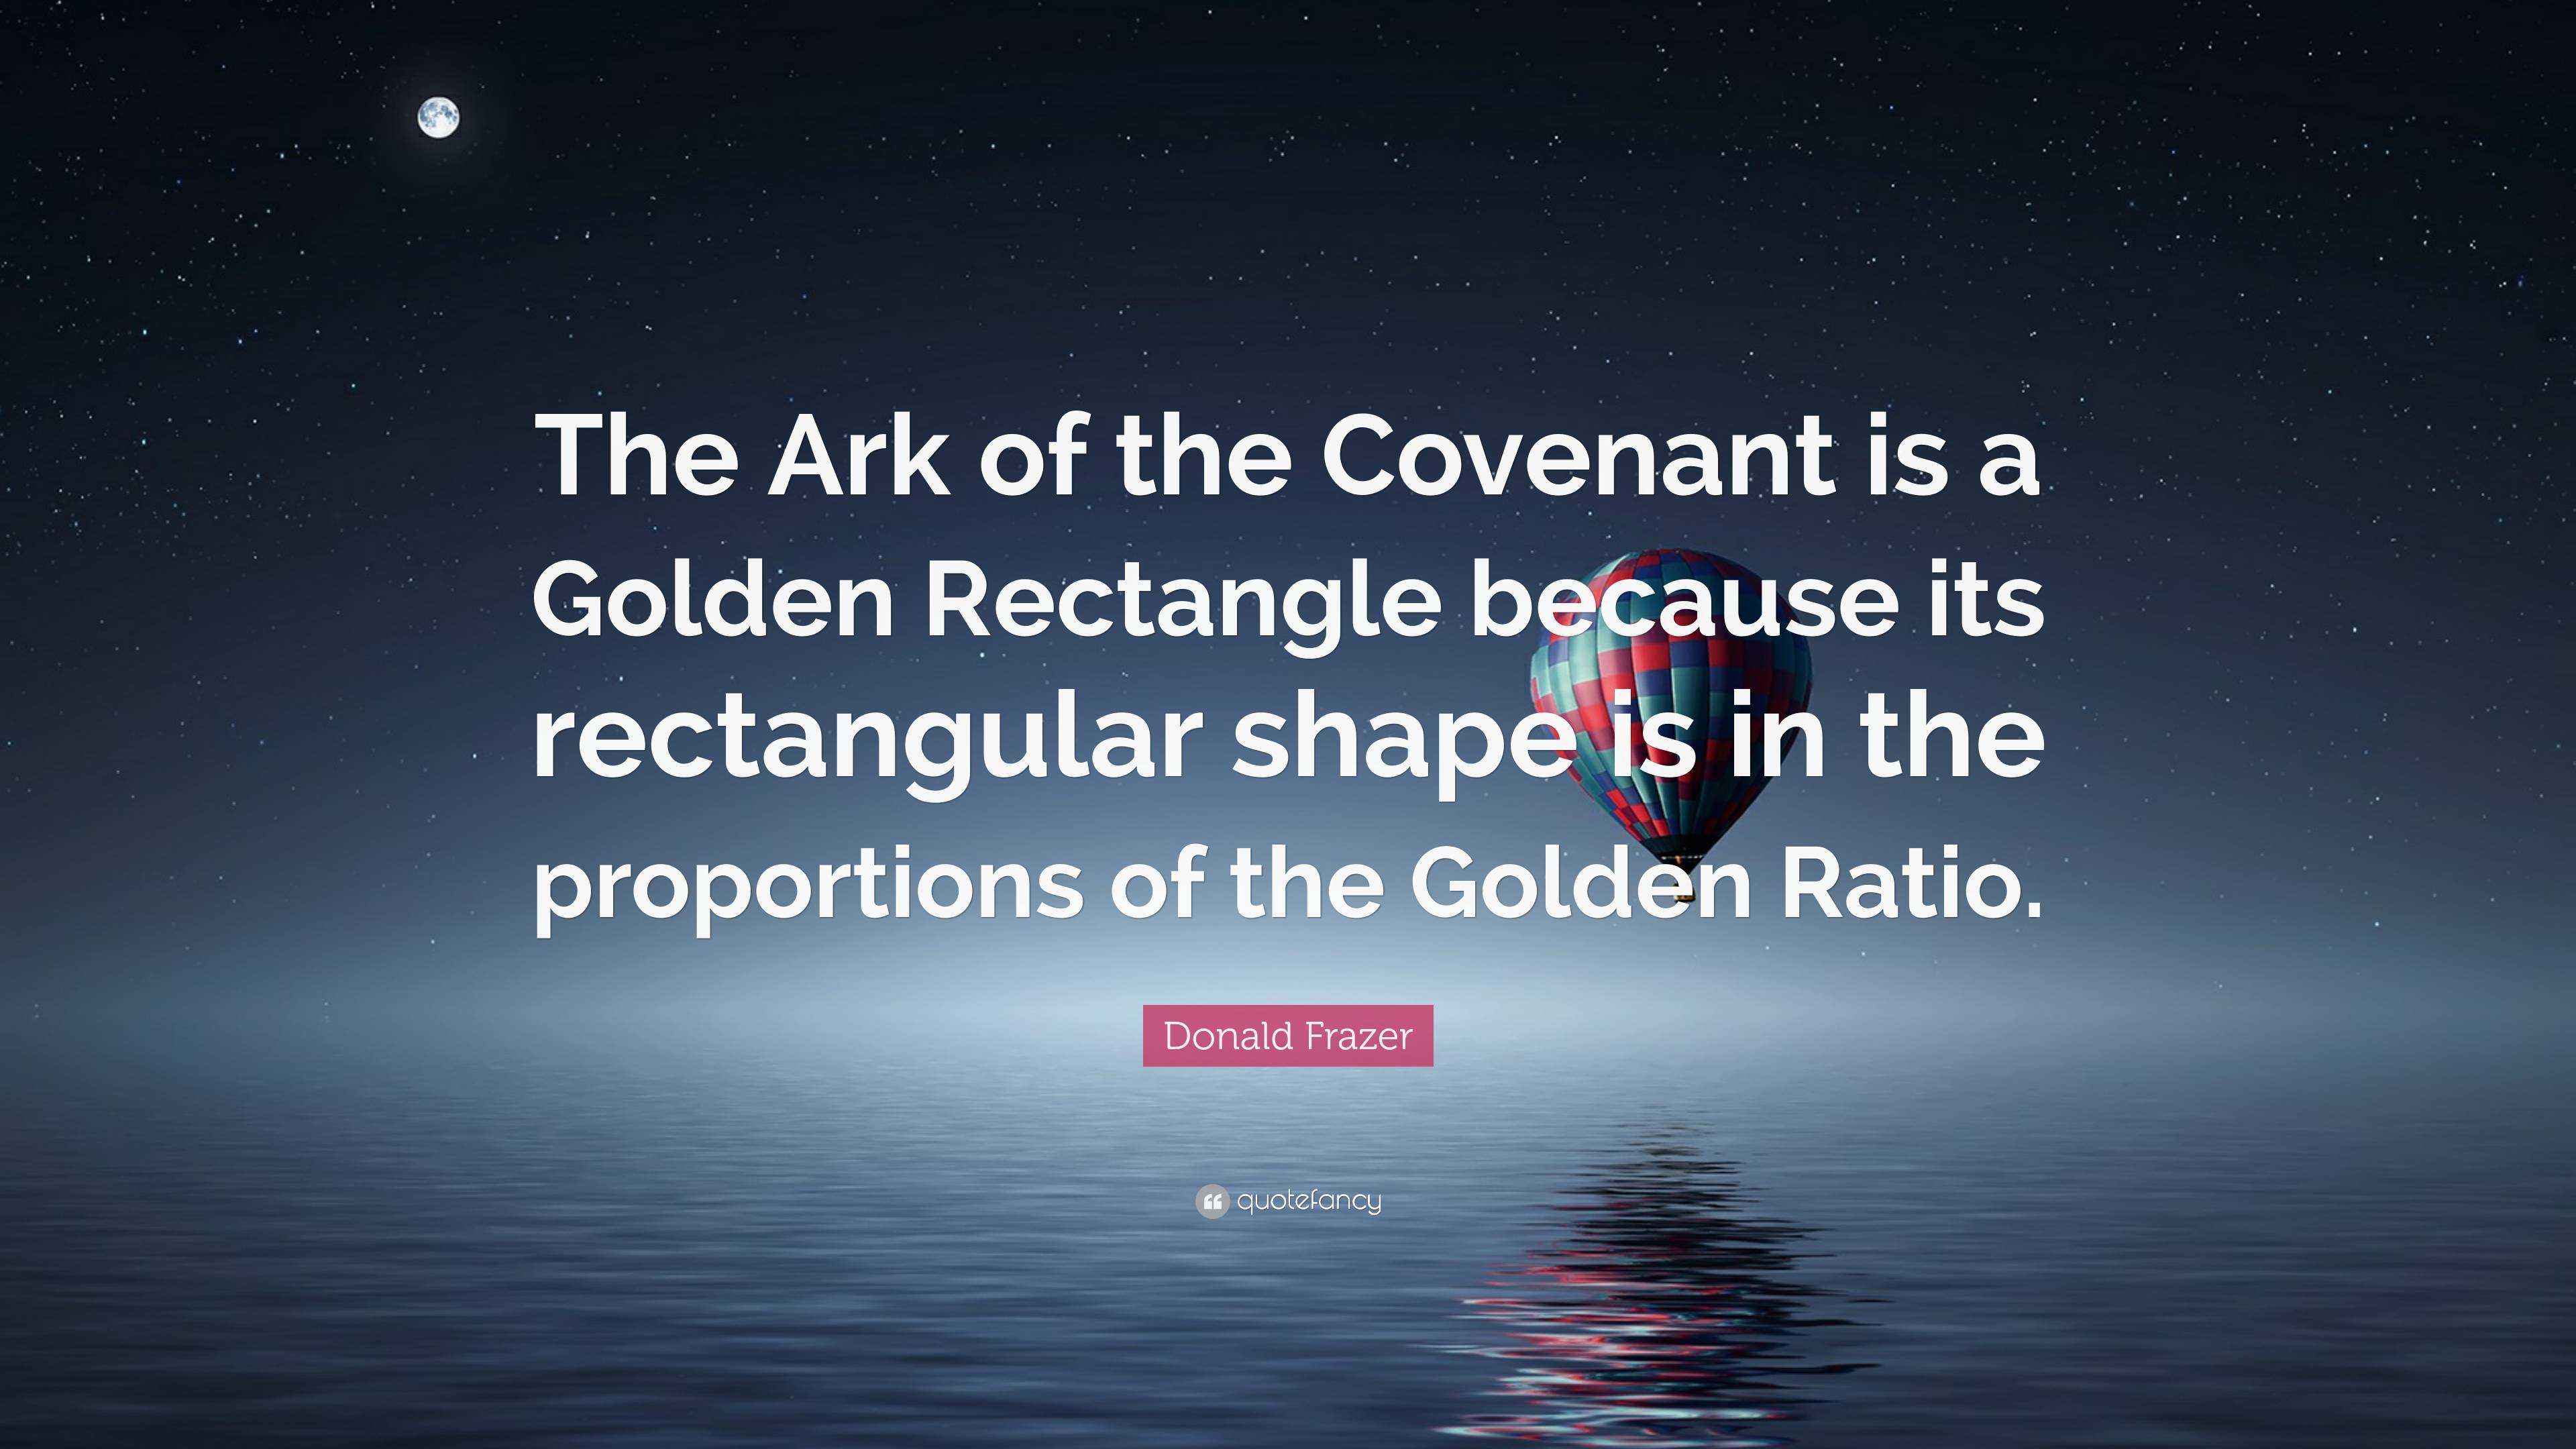 Donald Frazer Quote: “The Ark of the Covenant is a Golden Rectangle because  its rectangular shape